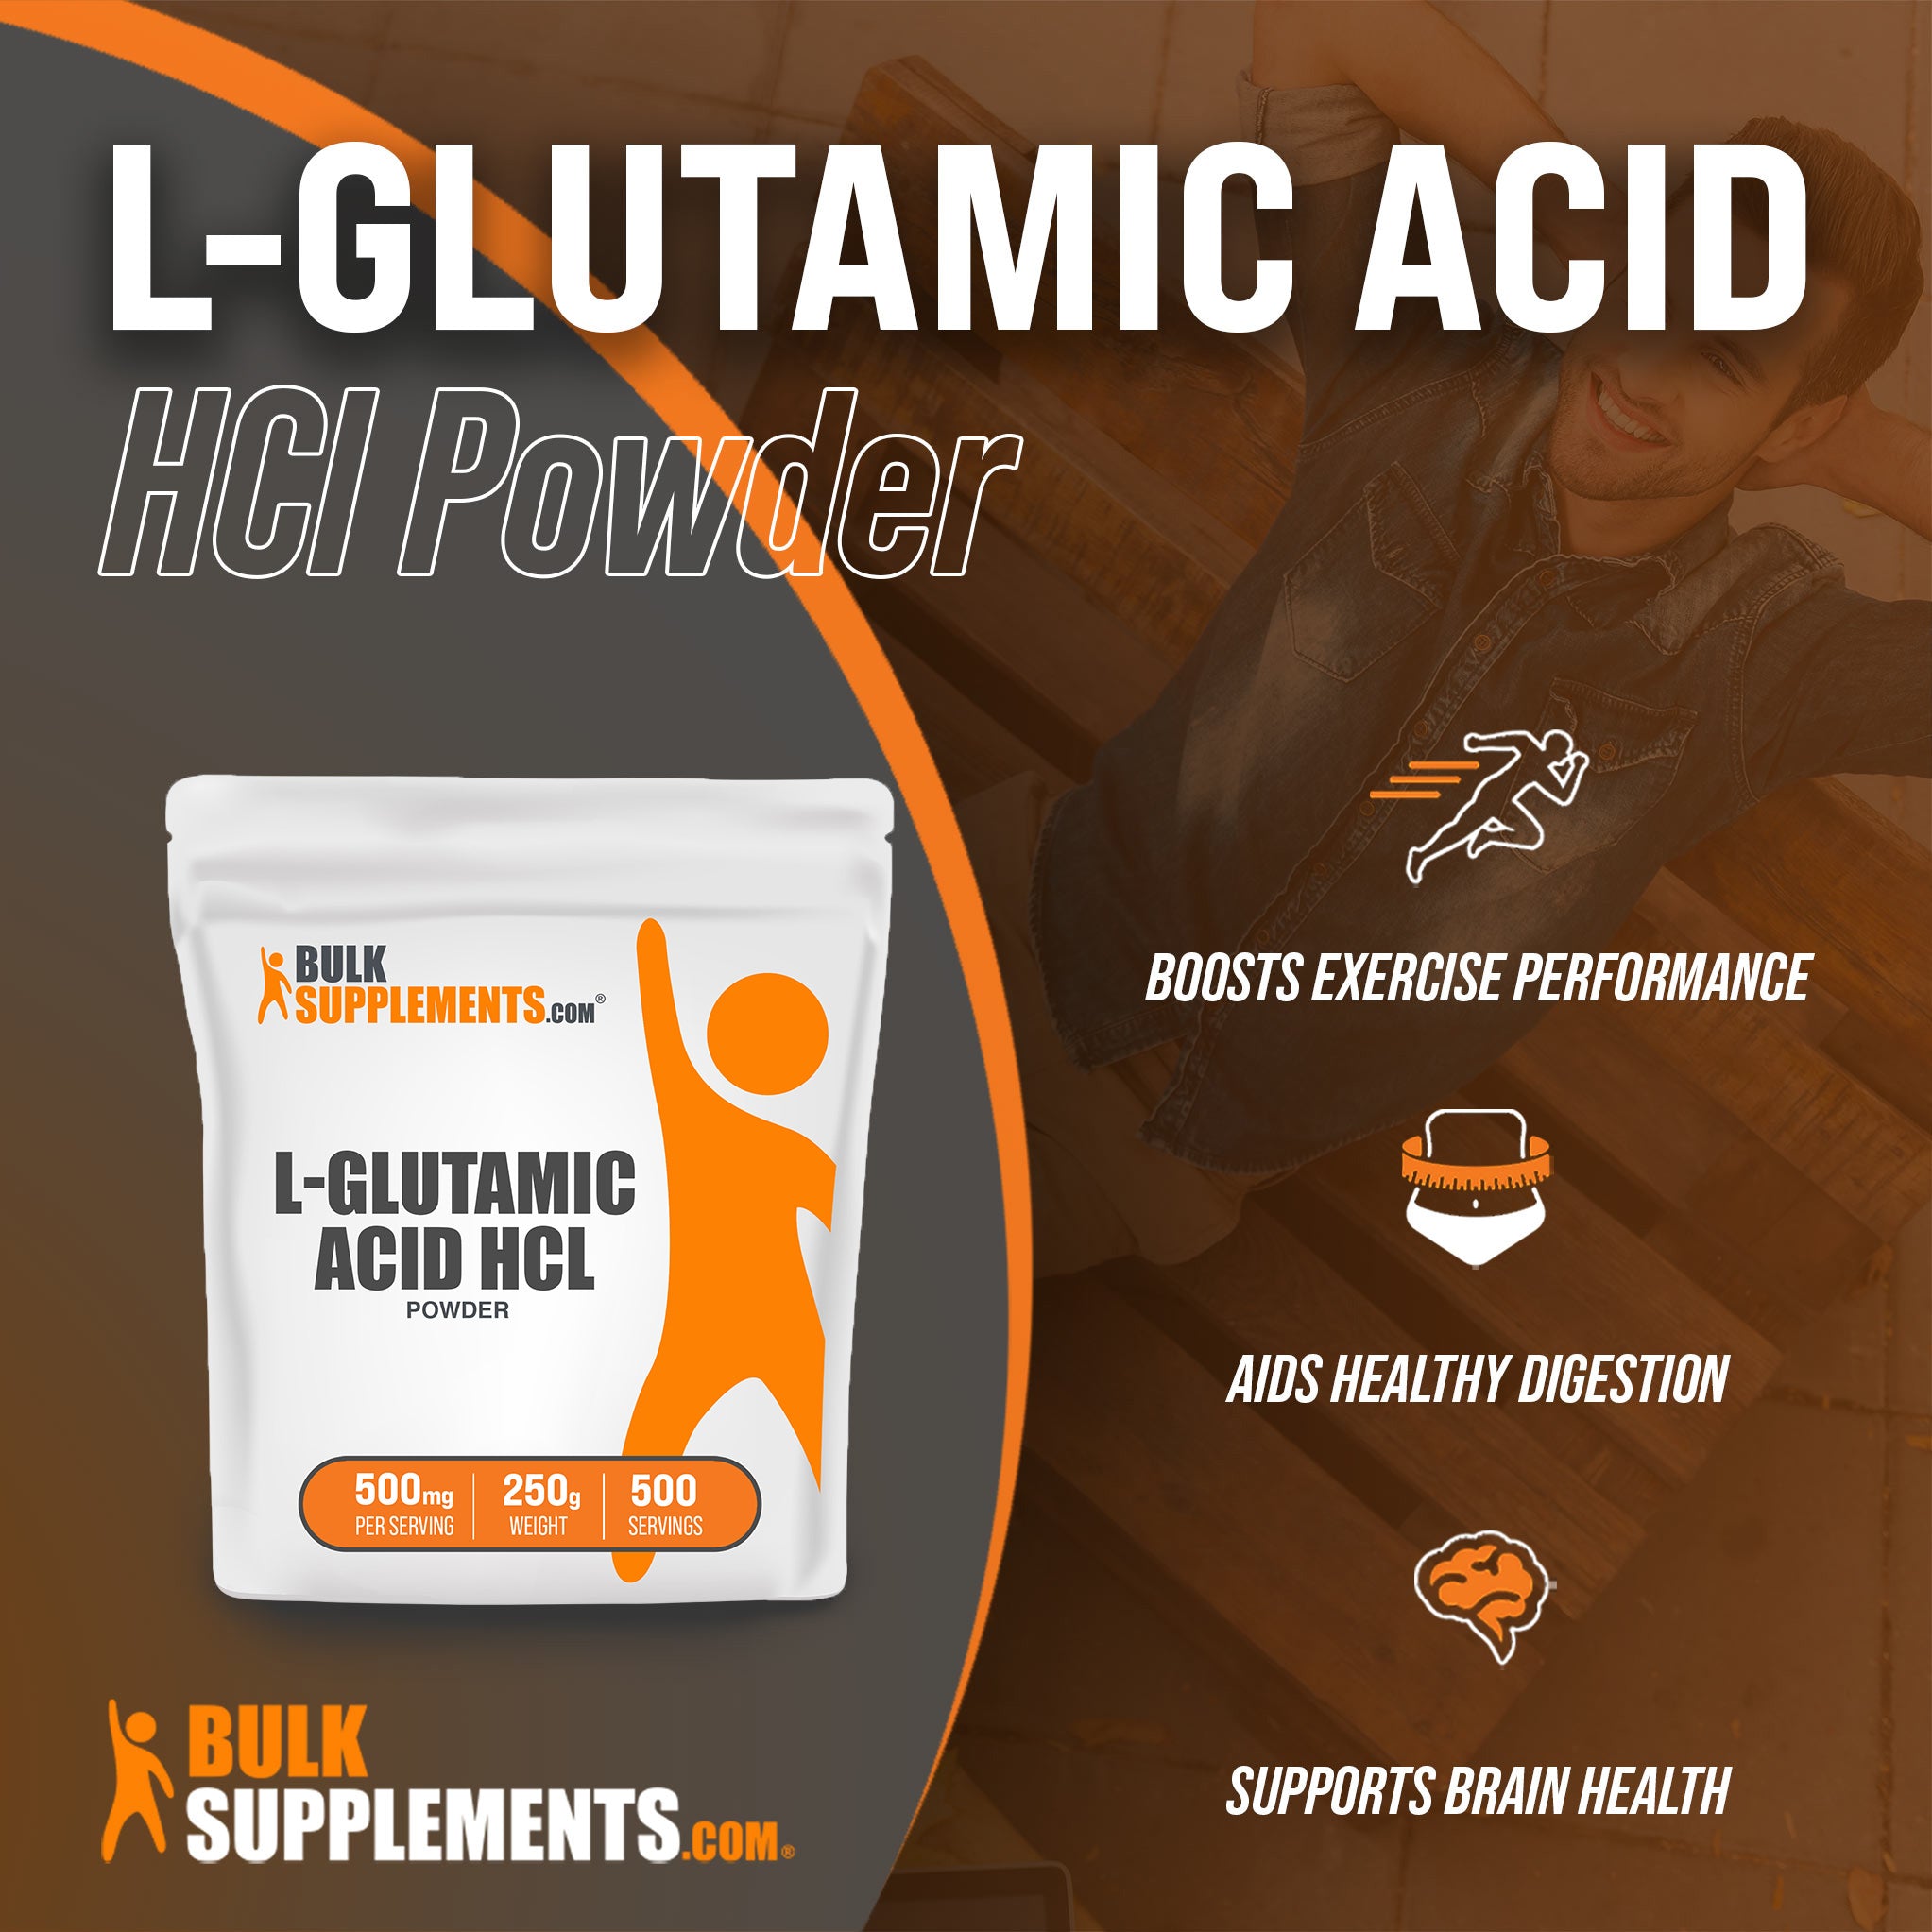 Benefits of L-Glutamic Acid HCl: boosts exercise performance, aids healthy digestion, supports brain health